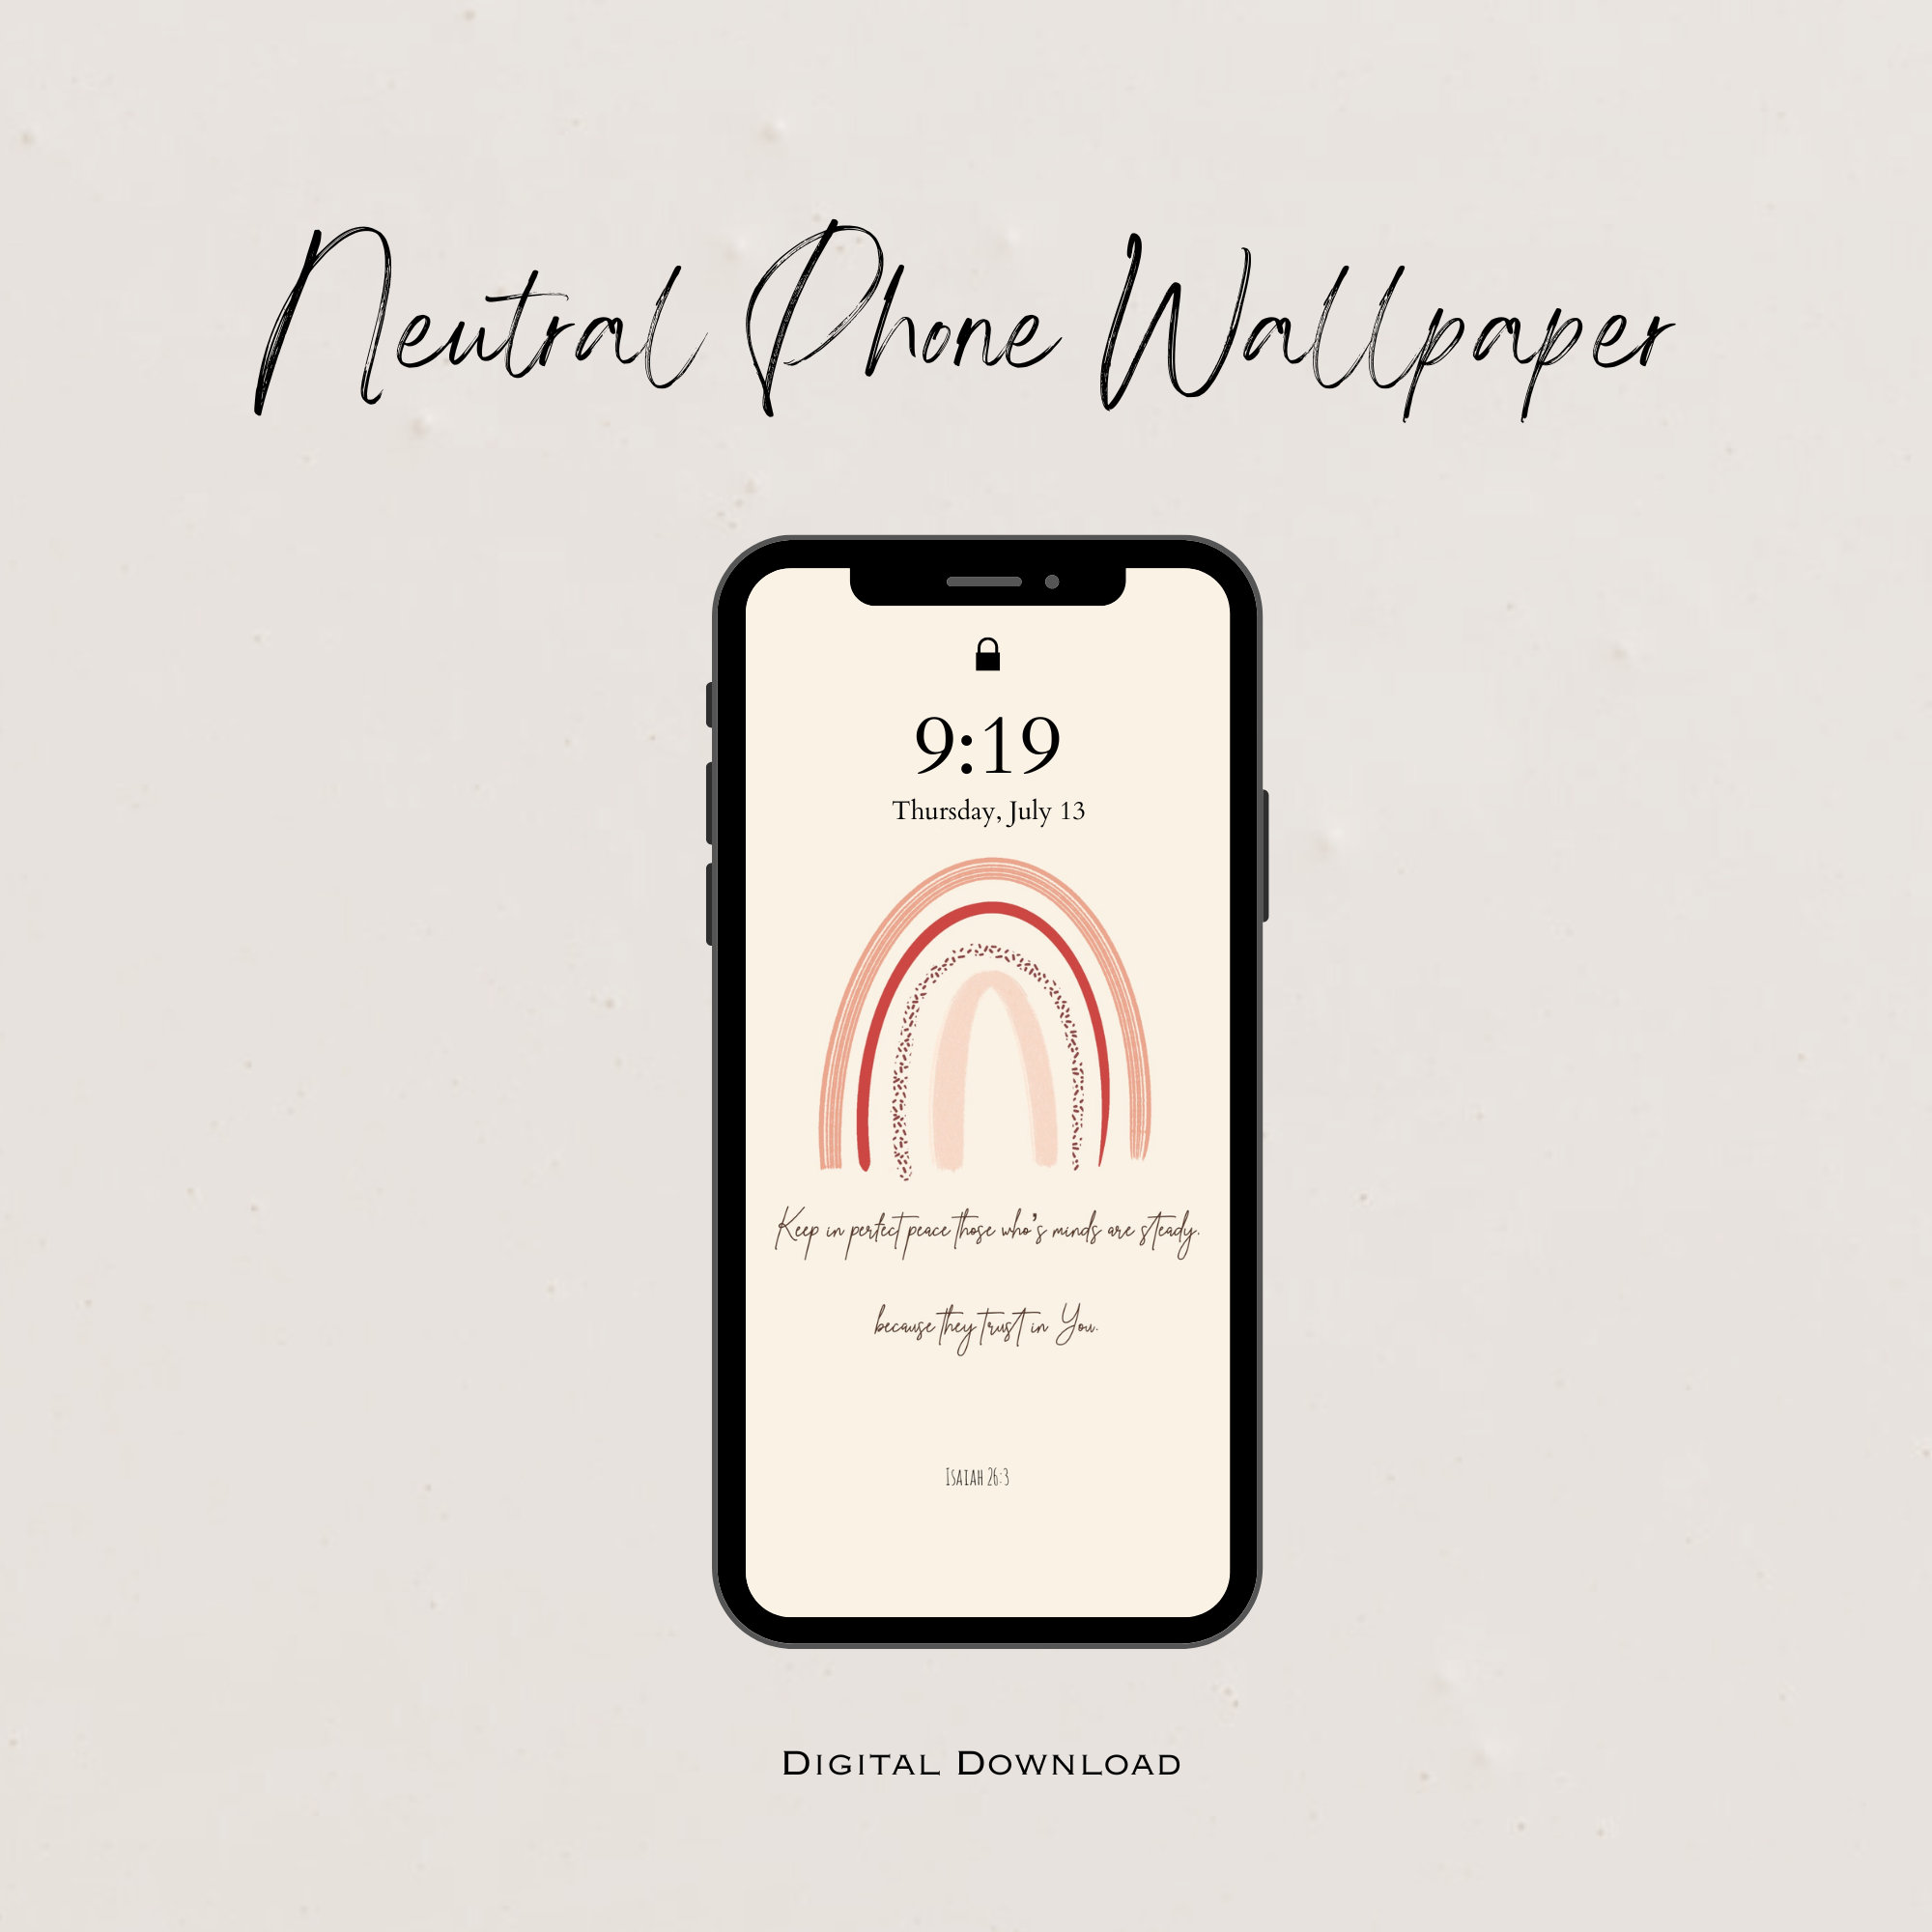 Free aesthetic phone wallpaper templates to customize